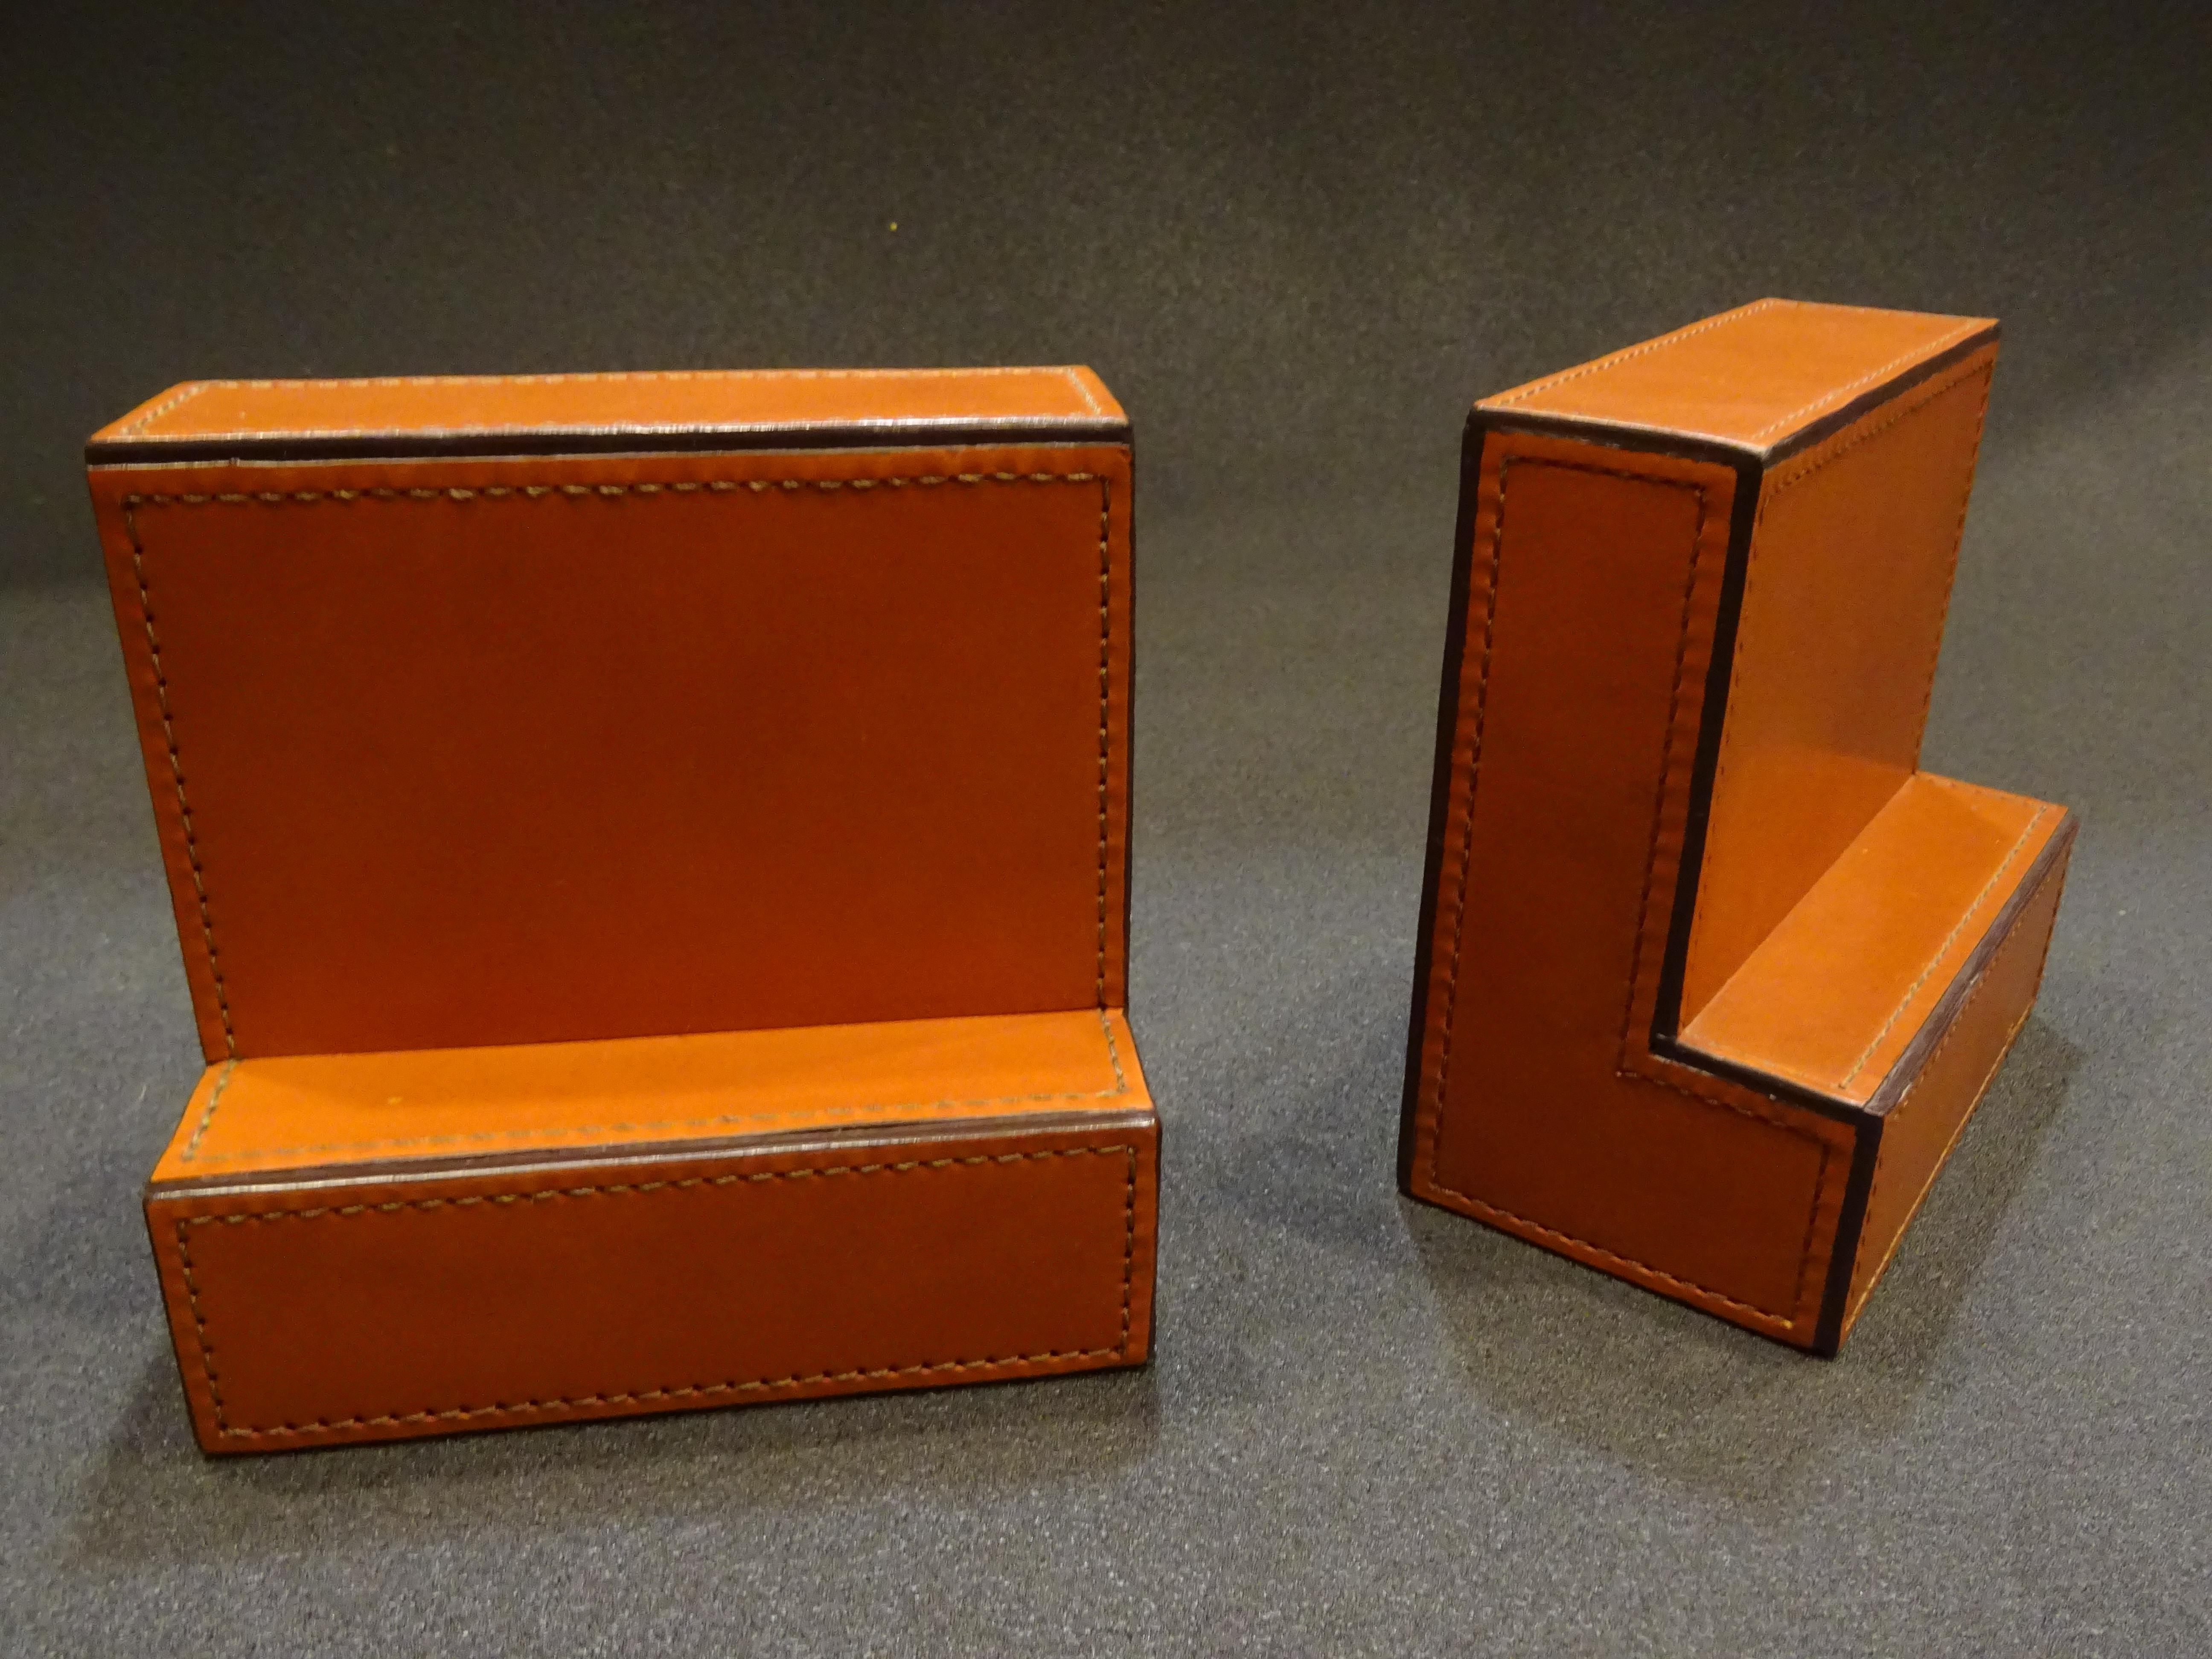 Hand-Crafted Ralp Lauren Desk Set of Tobacco Color Leather Separate Books